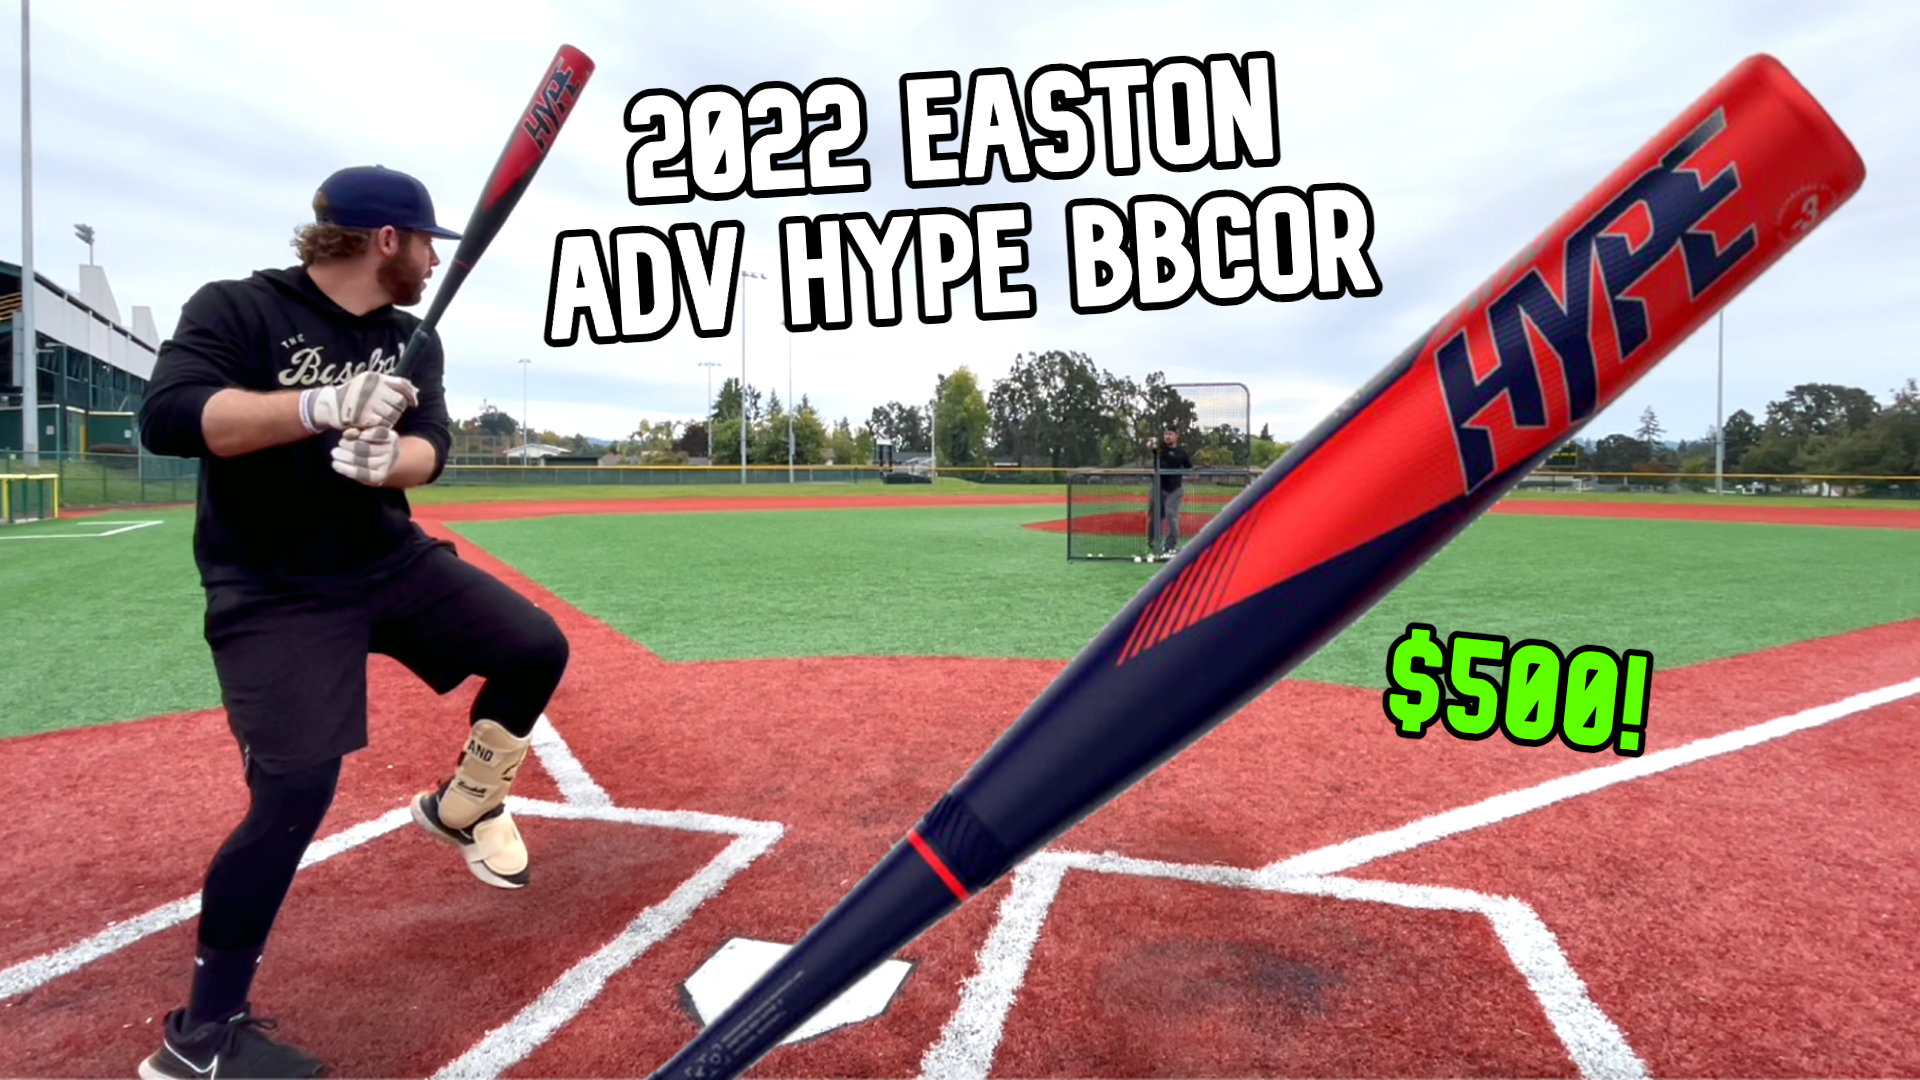 The Baseball Bat Bros on X: Our full review of the 2022 Easton